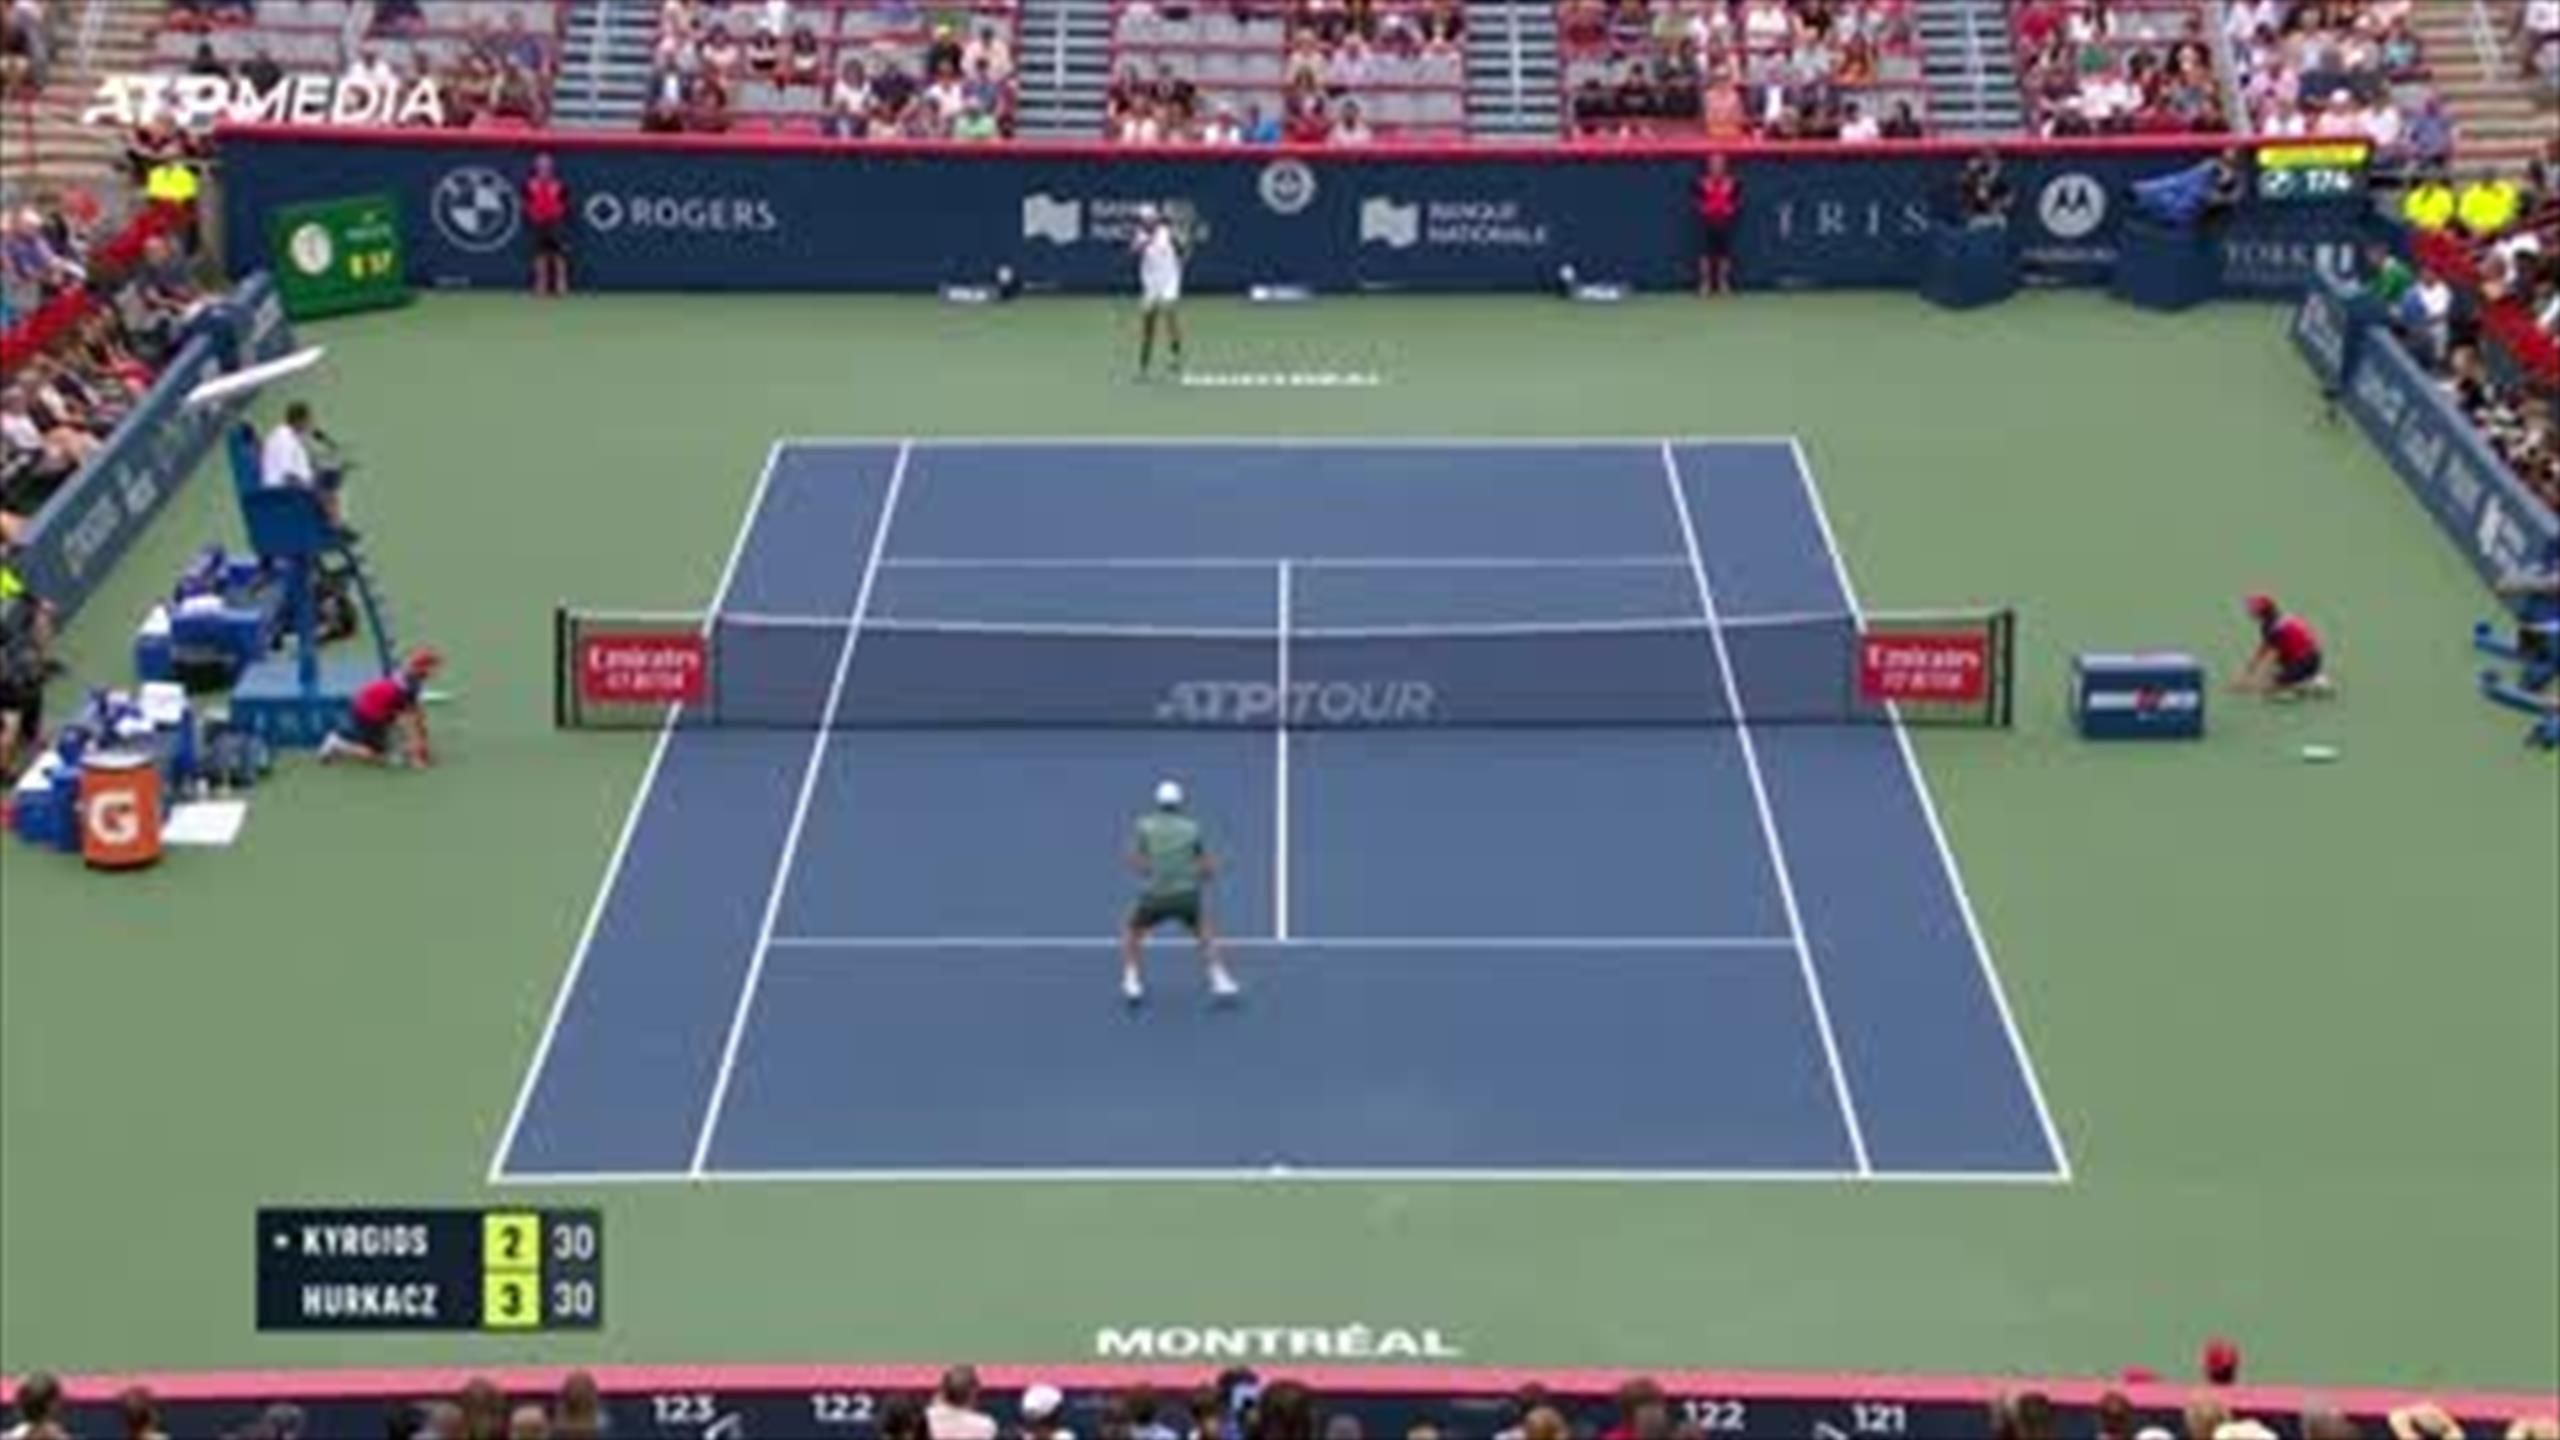 Highlights Hubert Hurkacz overcomes in-form Nick Kyrgios to move into Montreal semi-finals - Tennis video